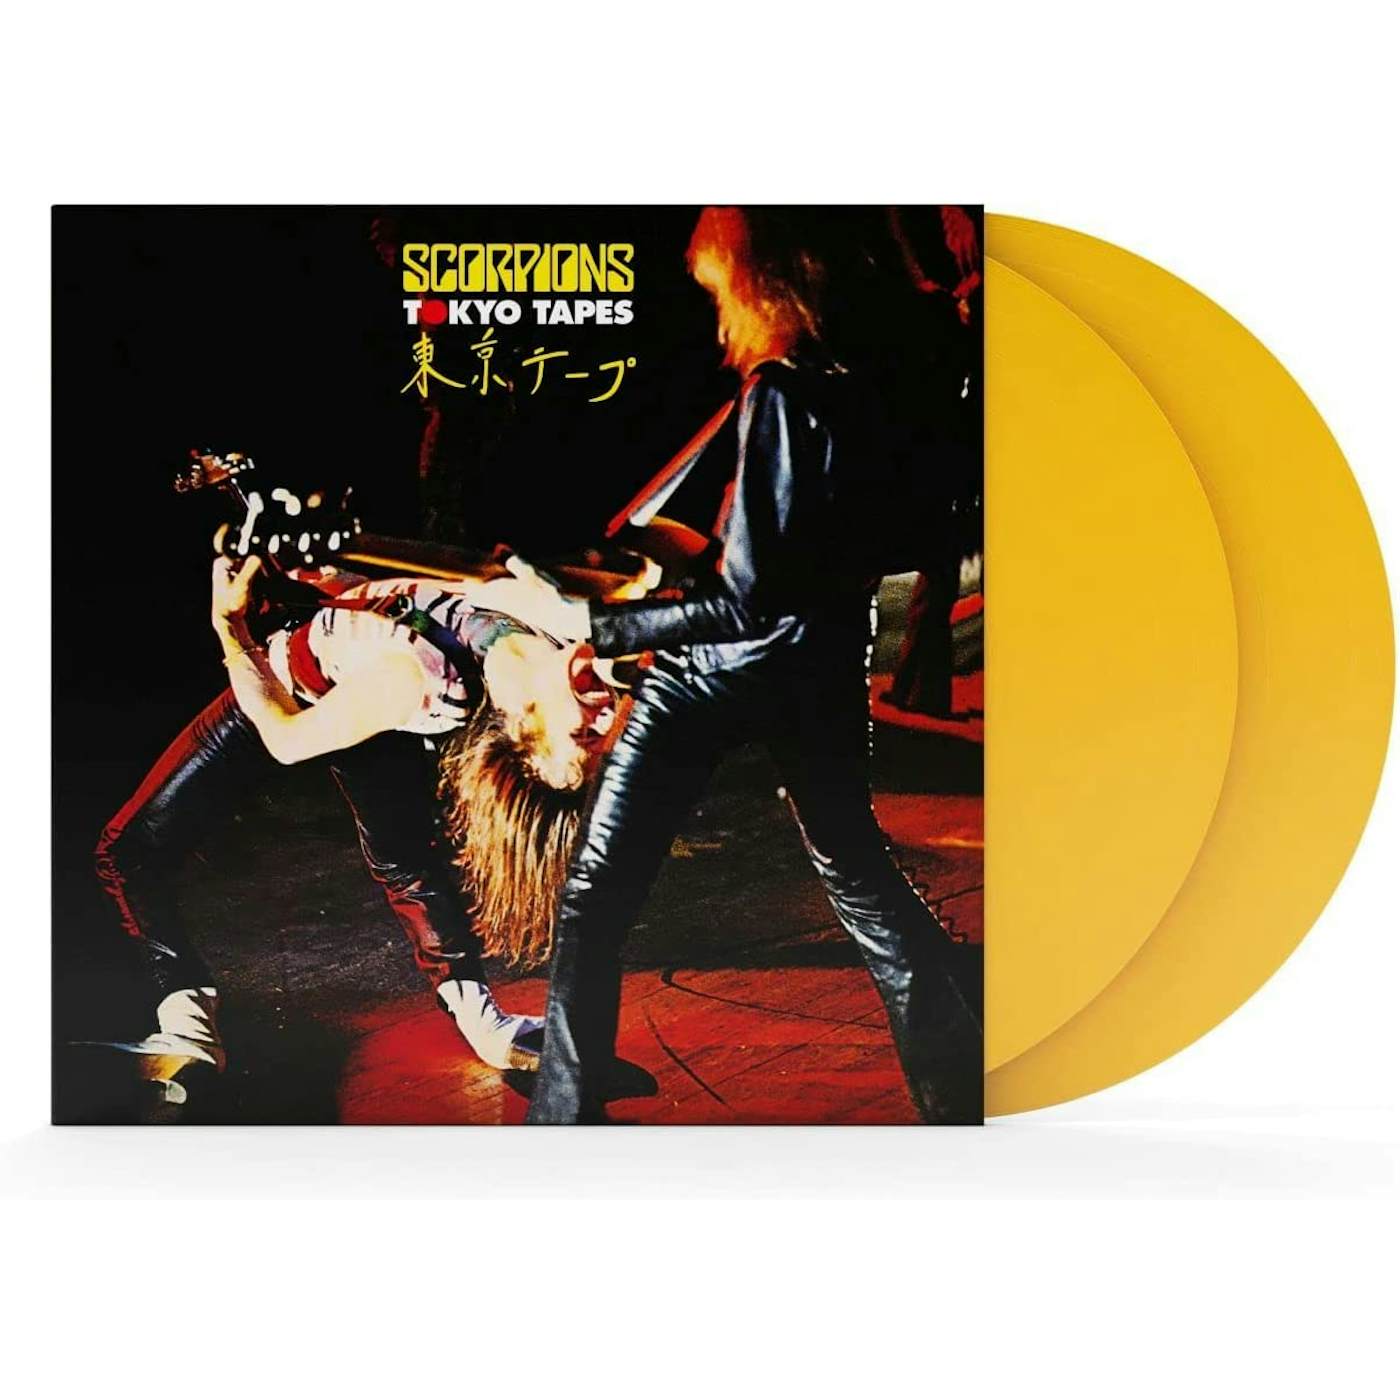 Scorpions - Tokyo Tapes Limited Edition (Vinyl)